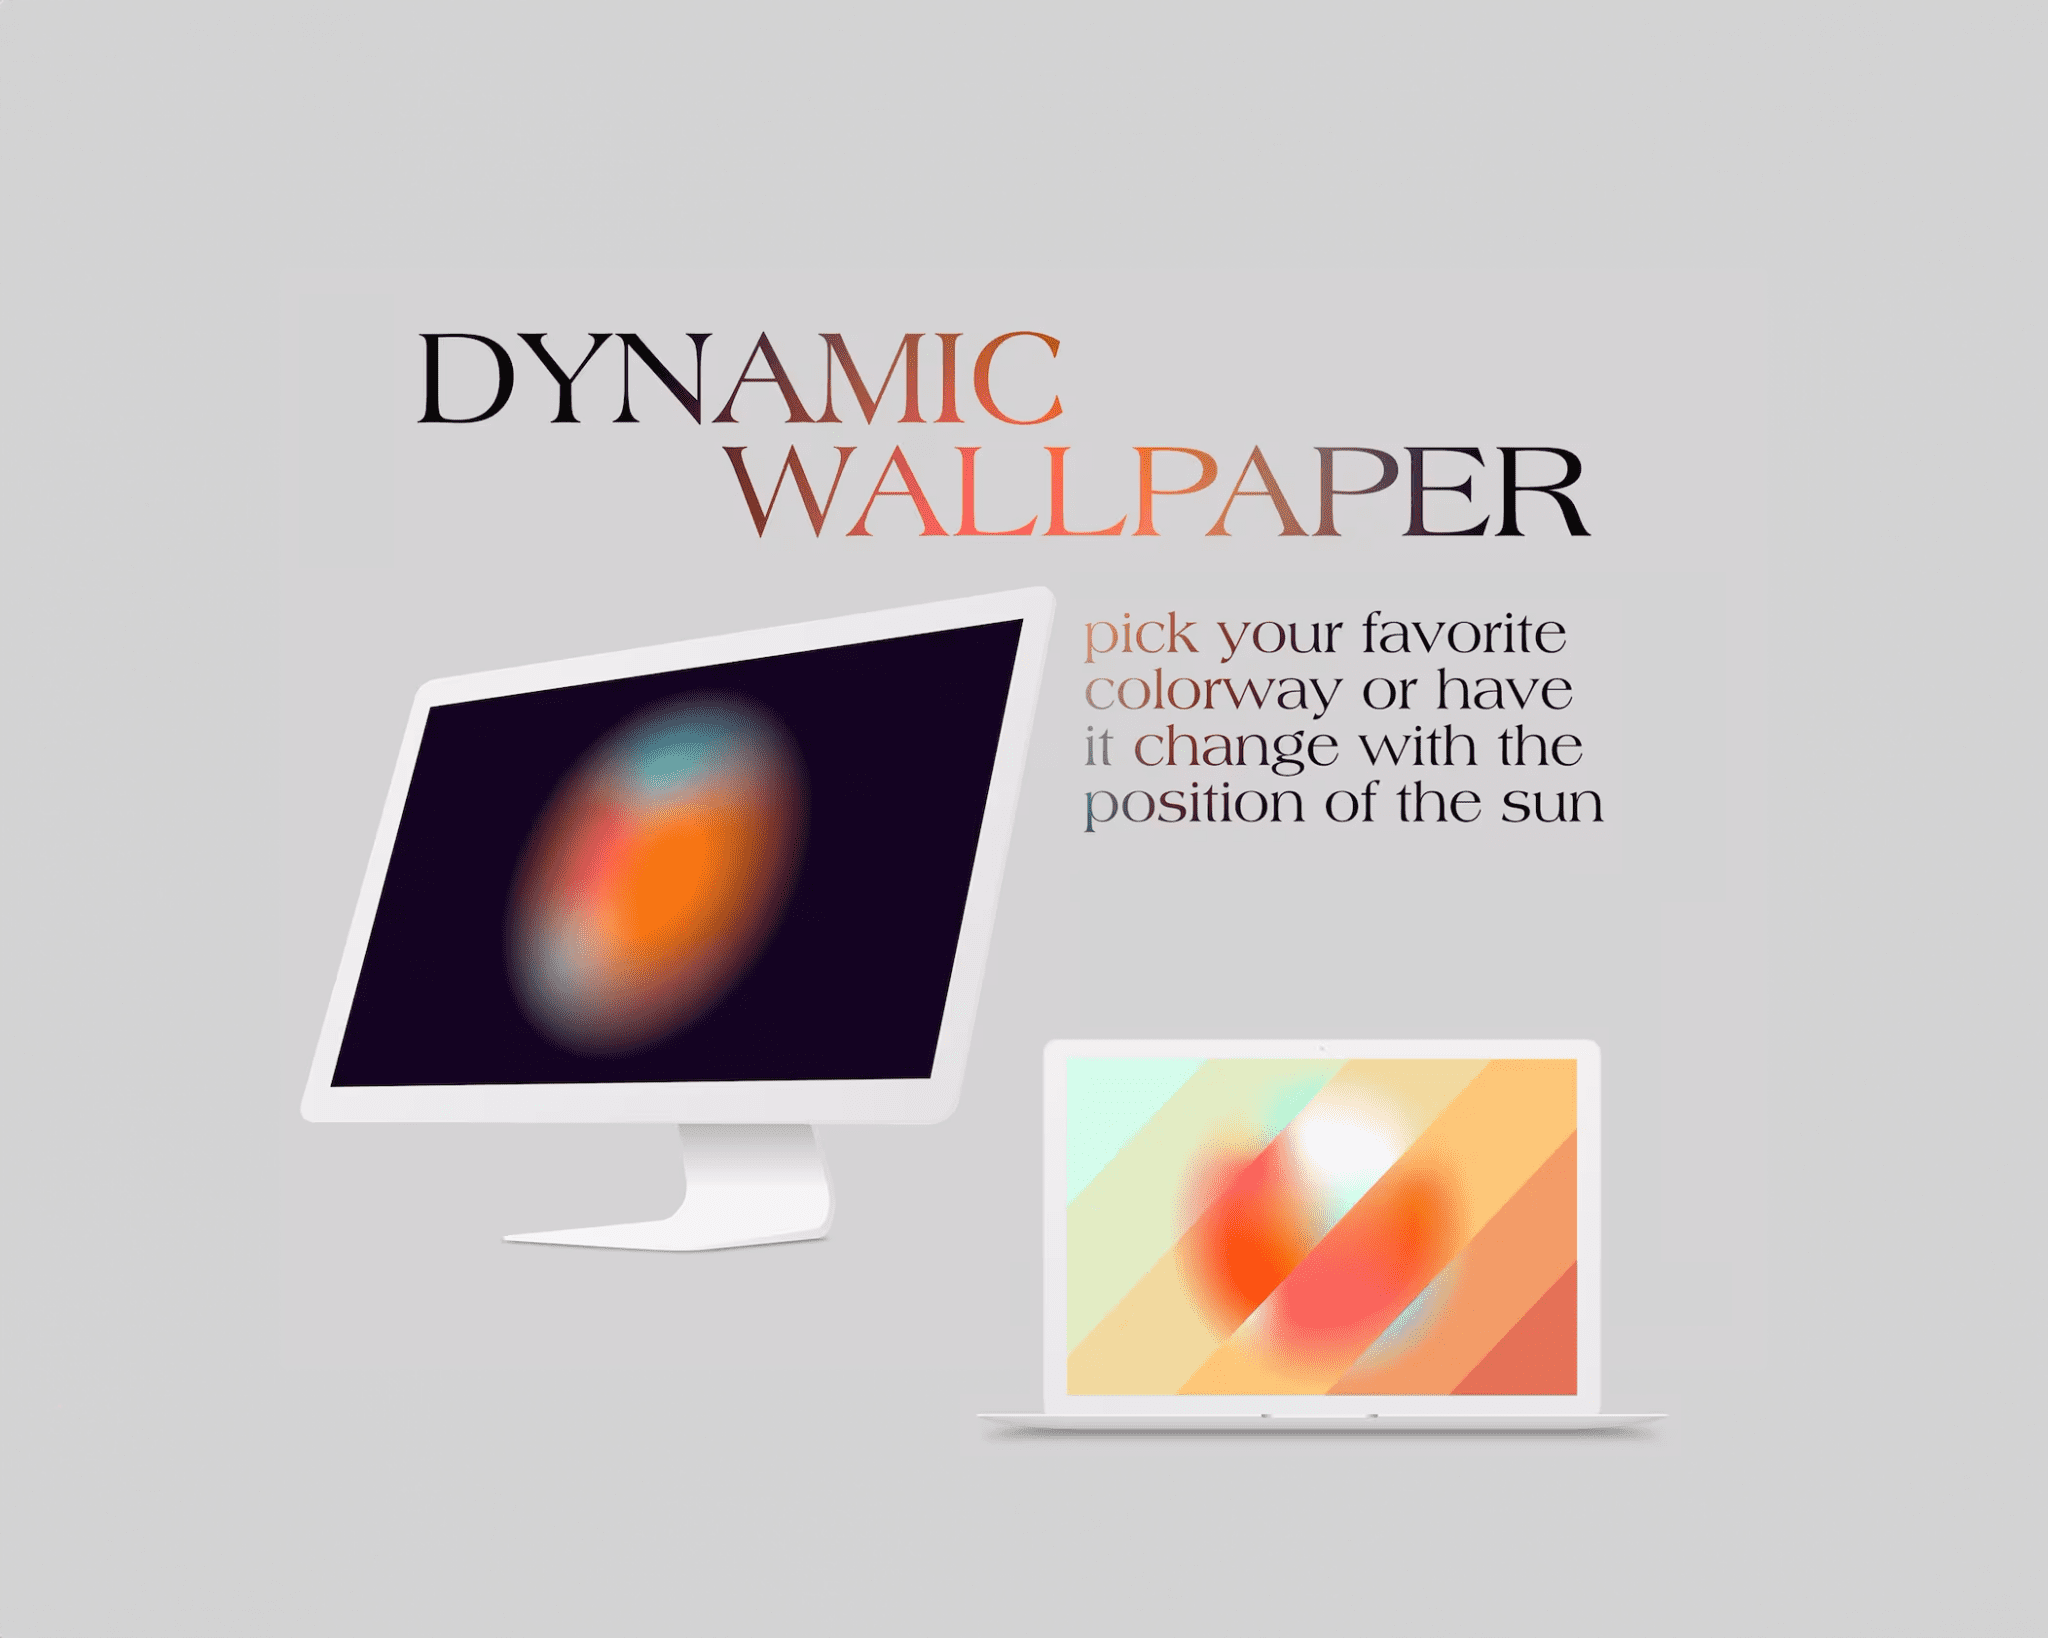 Mockup of gradient wallpapers displayed on a laptop and desktop screen. With the following text: "Dynamic Wallpaper, pick your favorite colorway or have it change with the position of the sun."